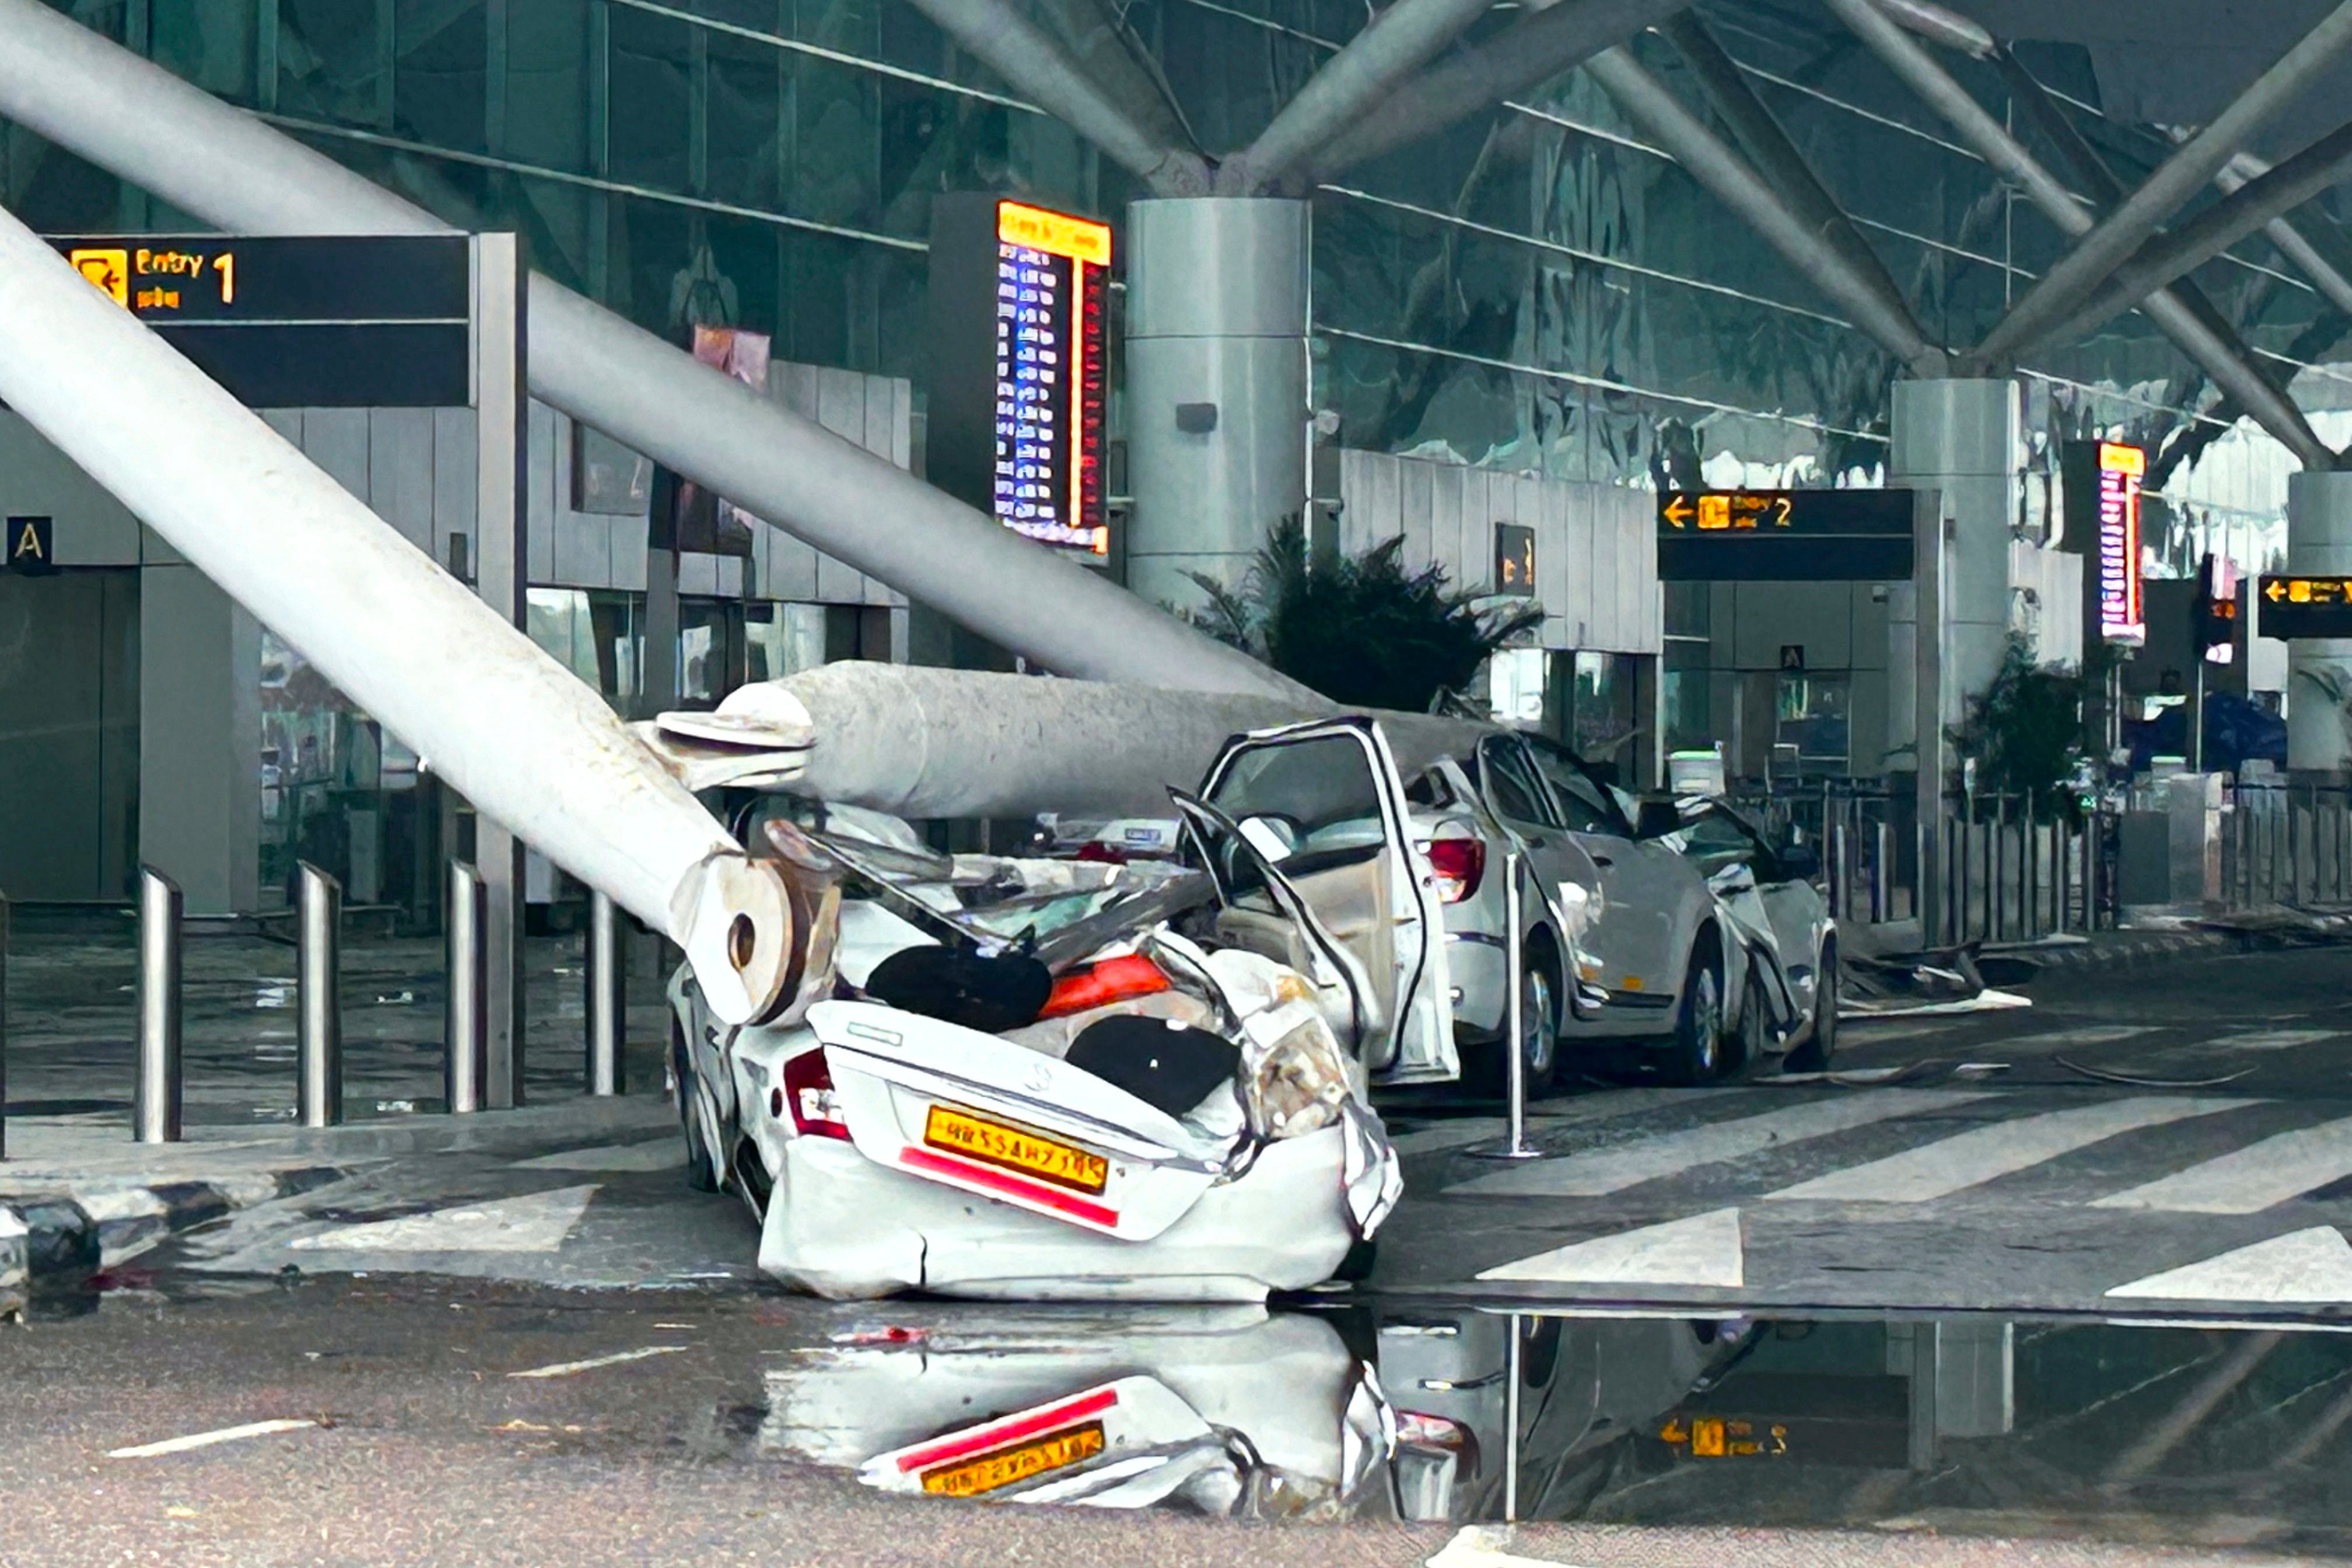 Parked vehicles were damaged by the collapse of a departure terminal canopy at New Delhi airport on Friday. Photo: AP